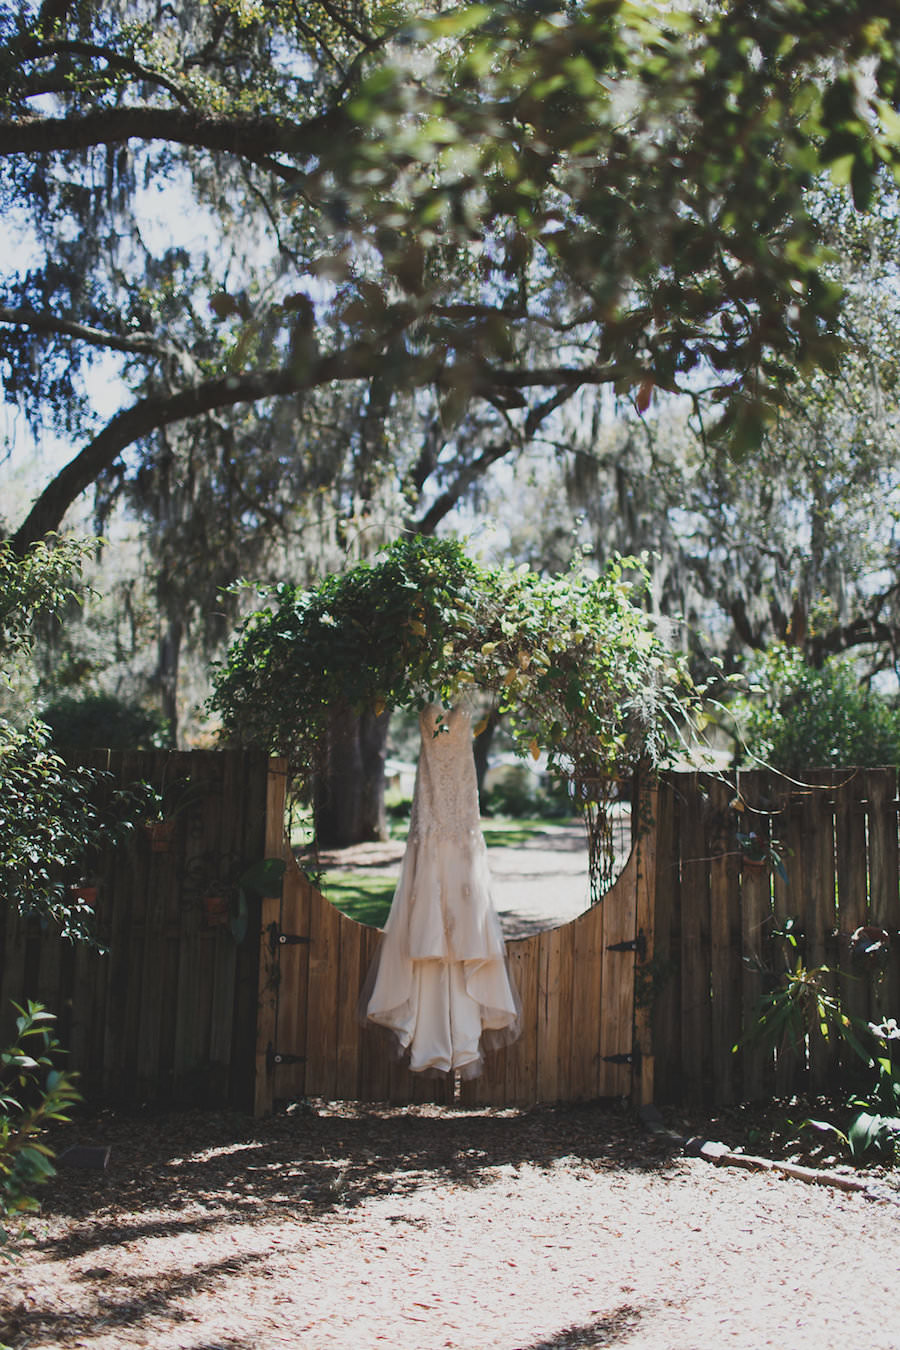 Cream Beaded Sweetheart Trumpet Wedding Dress in Rustic Setting with Trees